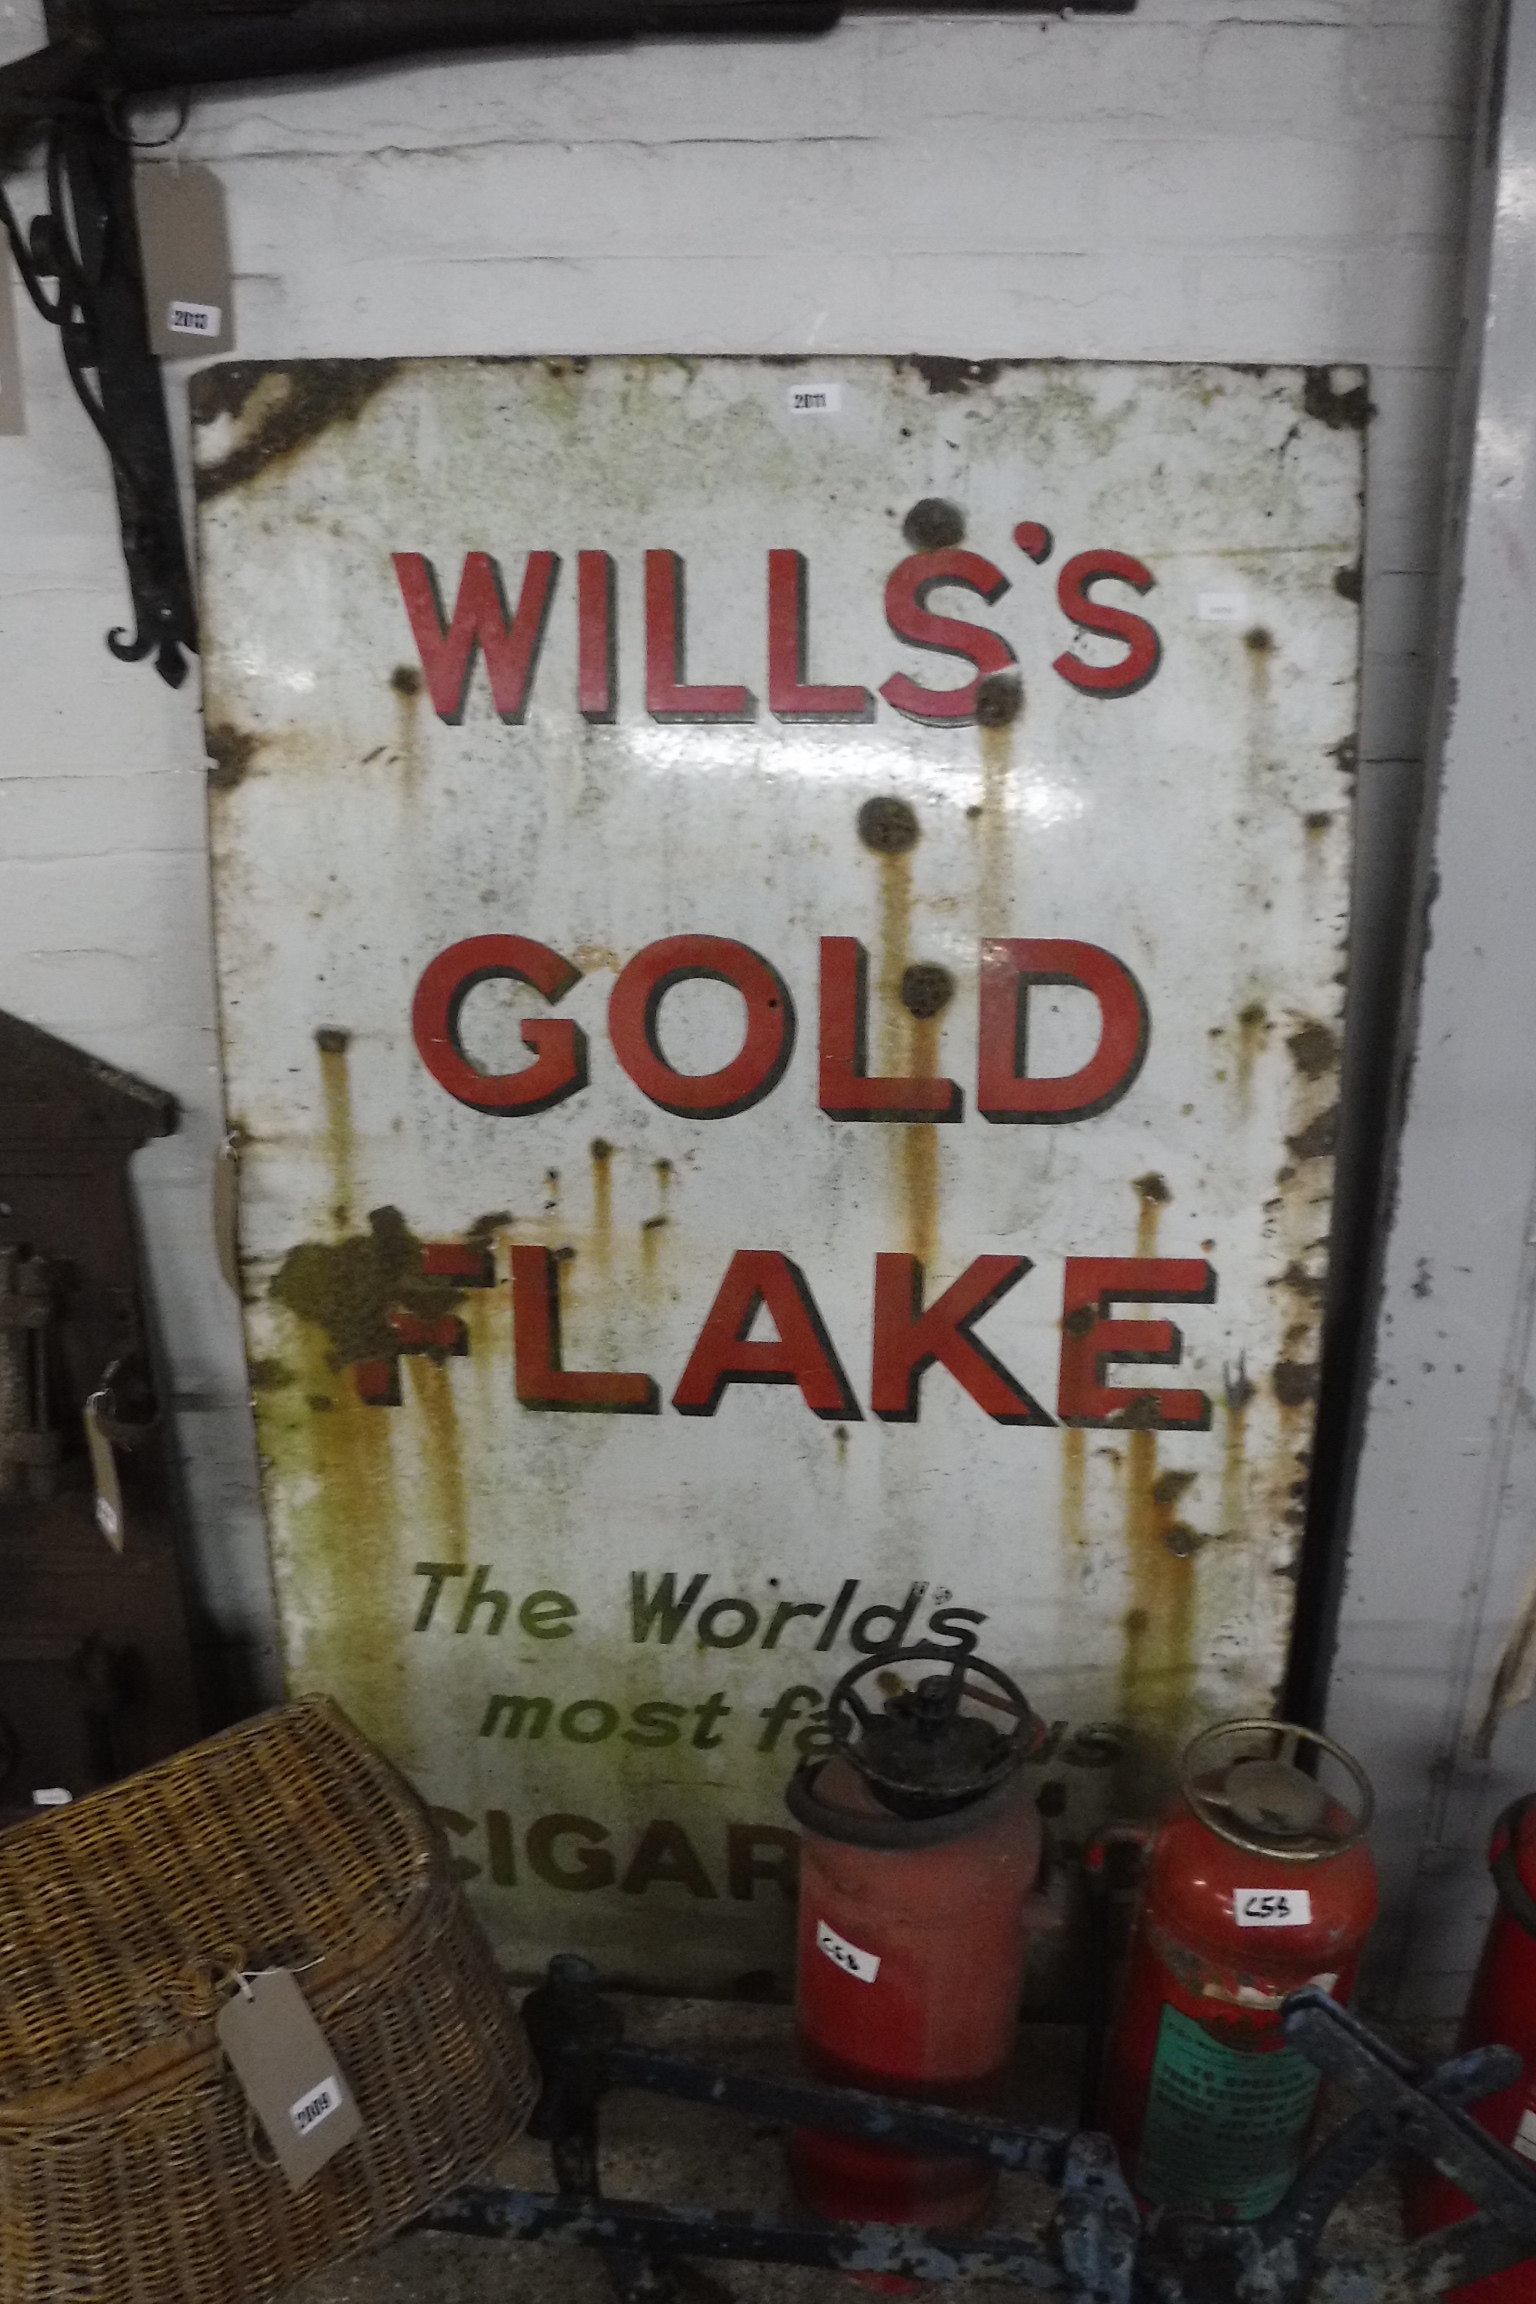 Enamelled metal sign advertising Will's Goldflake cigarettes, 915mm x 1530mm